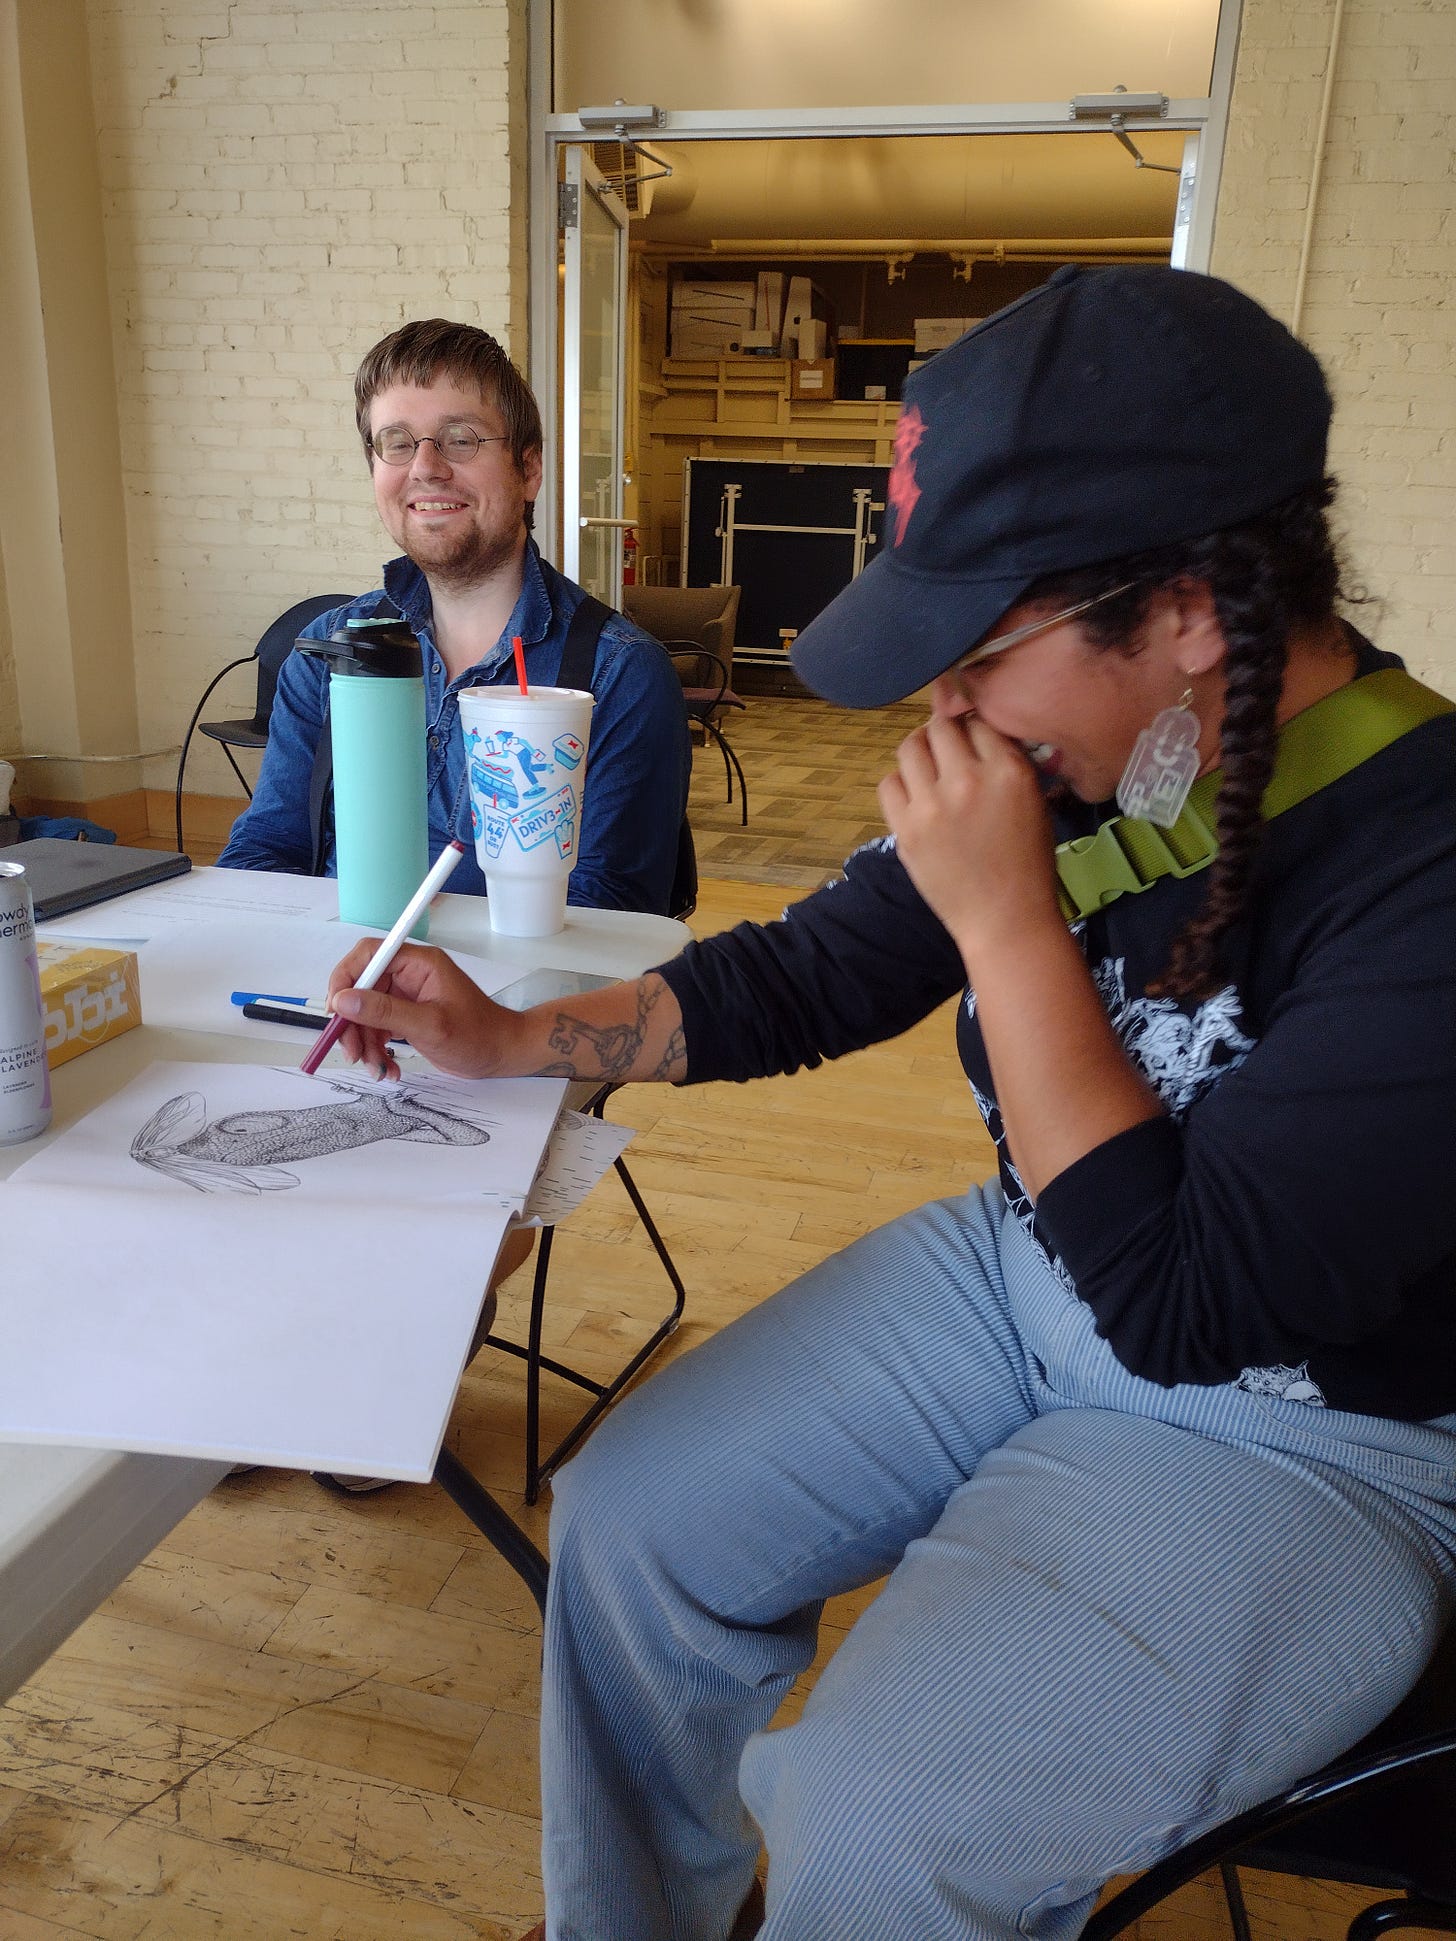 Two people are sitting in chairs at a table. One person is smiling and coloring in a coloring book, and the other person is smiling and looking straight into the camera.